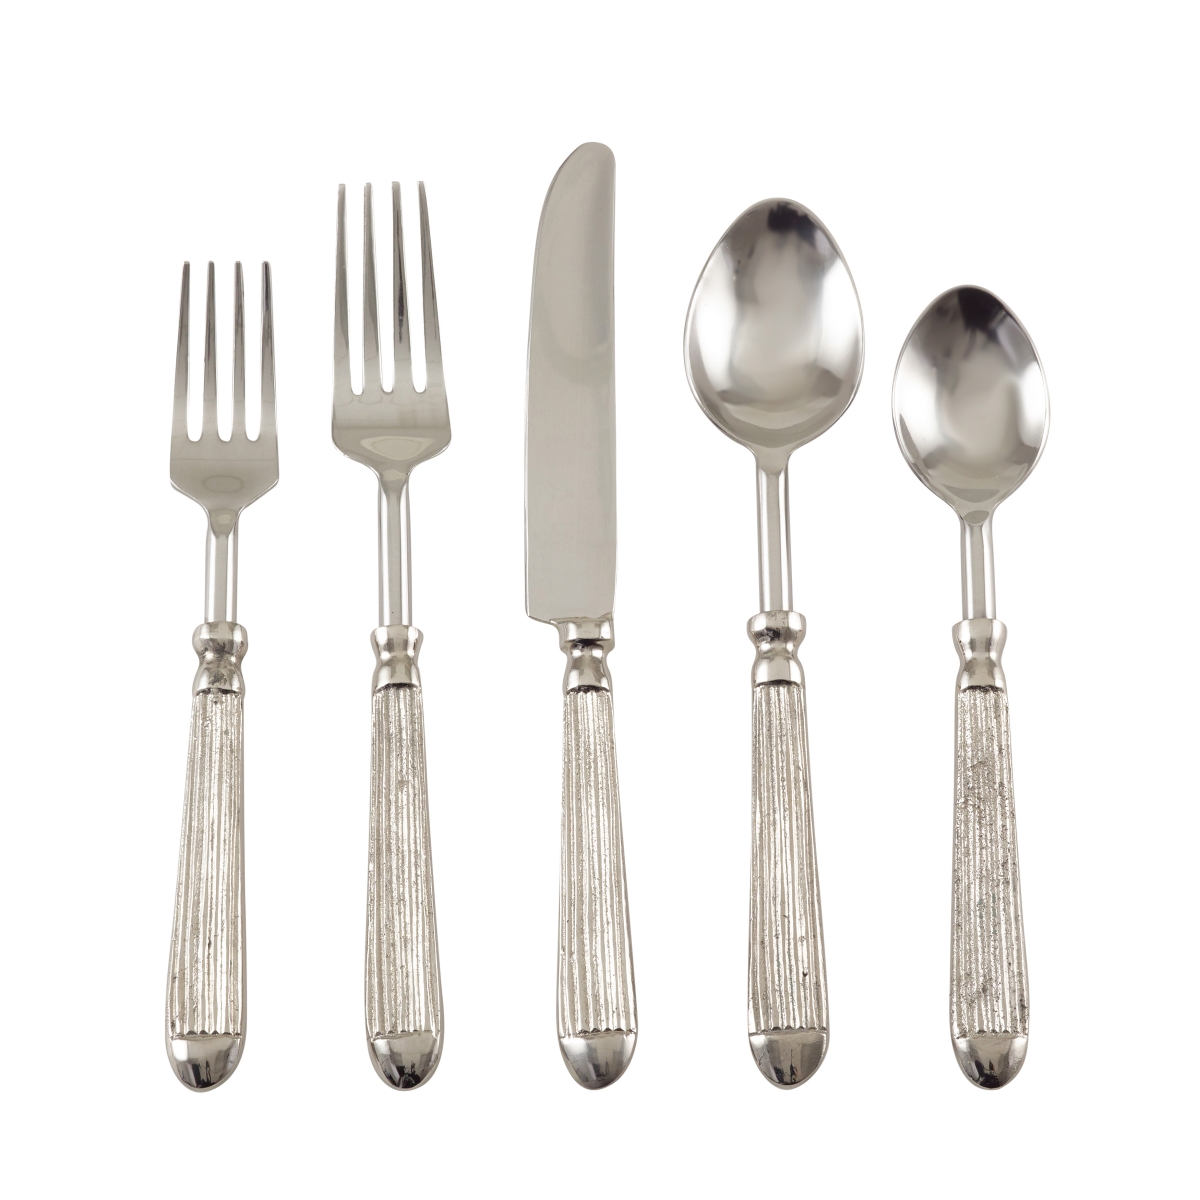 Picture of Saro Lifestyle SP155.S Ribbed Design Stainless Steel Flatware - Set of 5